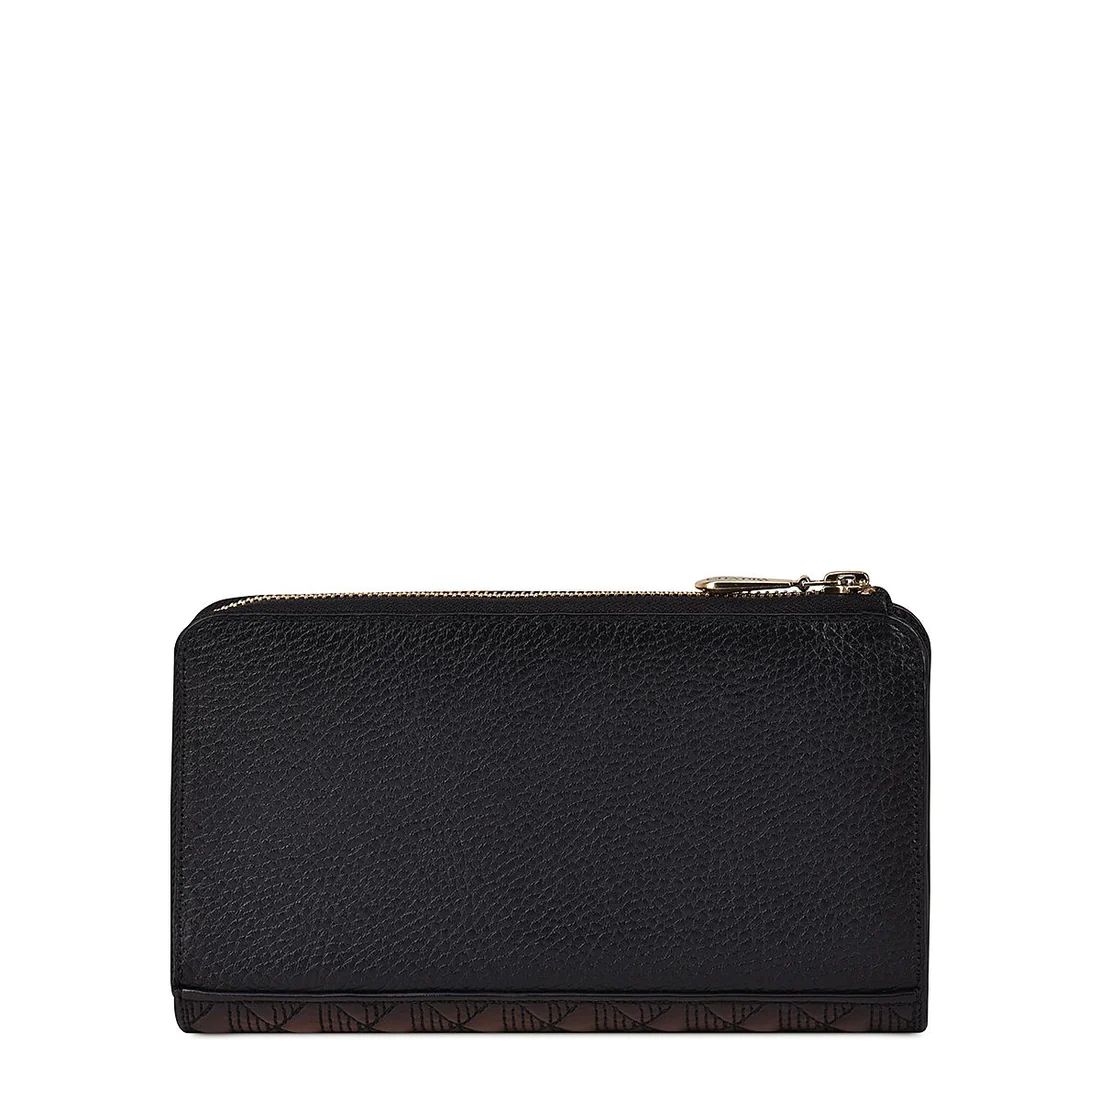 Cuadra | Embroidery Brown Leather Wallet With Geometric Motifs